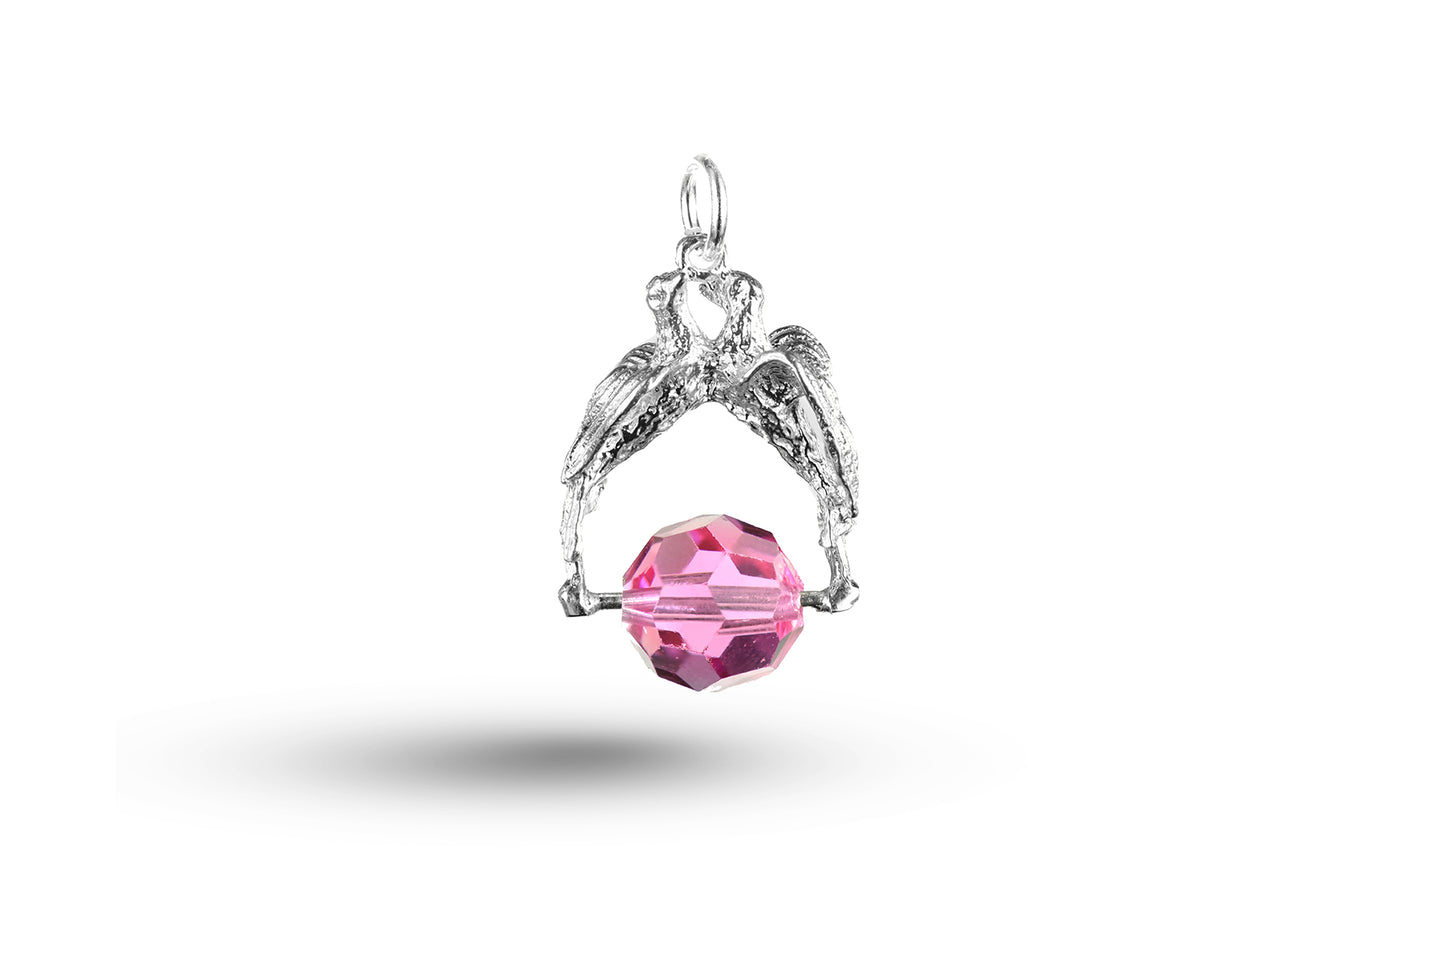 White gold Love Birds and Crystal Ball charm.